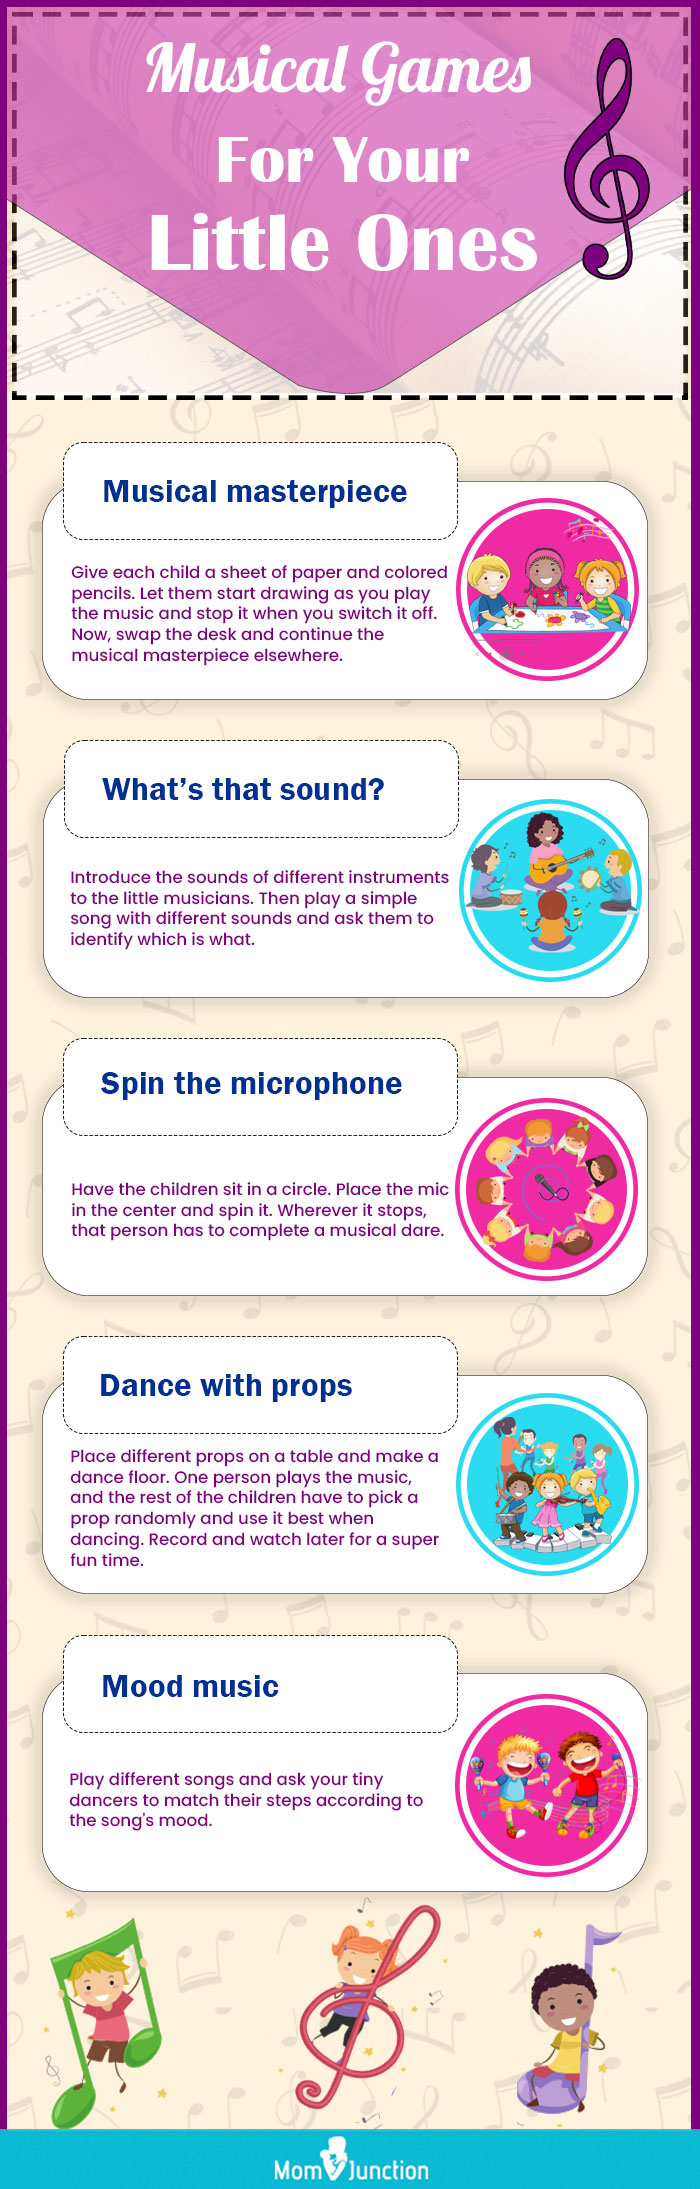 Sounds of Musicial Instruments  Kids Learning Videos 